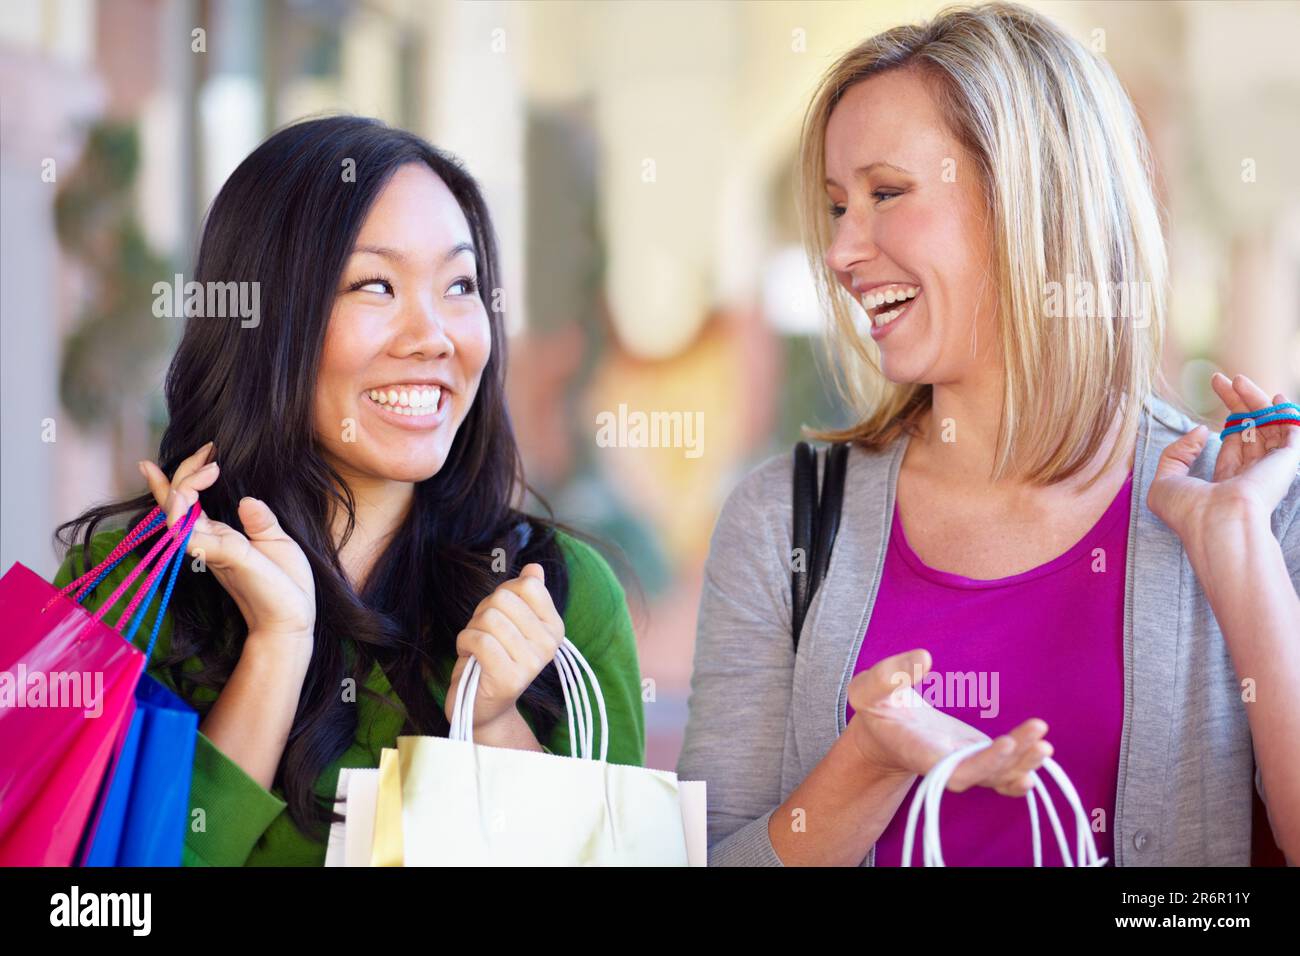 Happy, sale and women with bags from shopping in the city or mall and excited about a deal. Smile, conversation and diversity with female friends Stock Photo